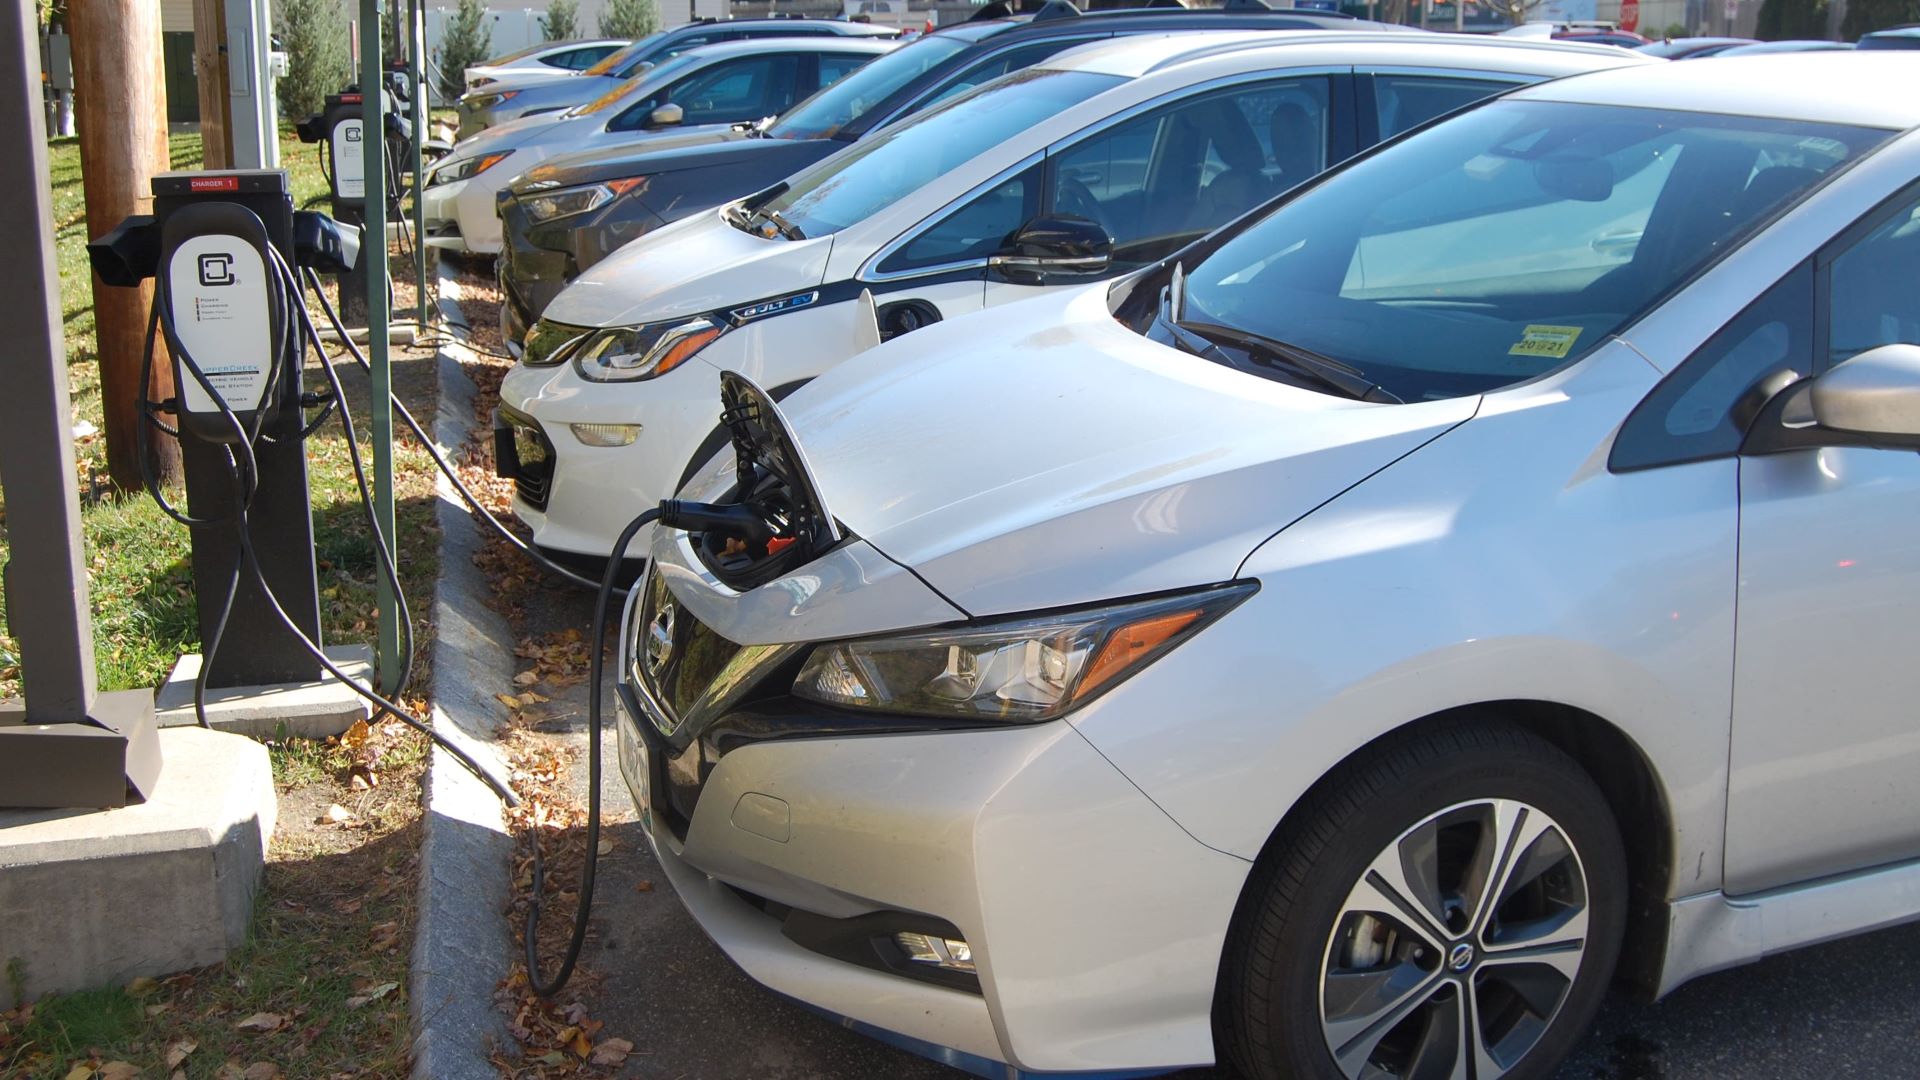 Electric car owner: My only regret is EVs weren’t available in Maine years earlier